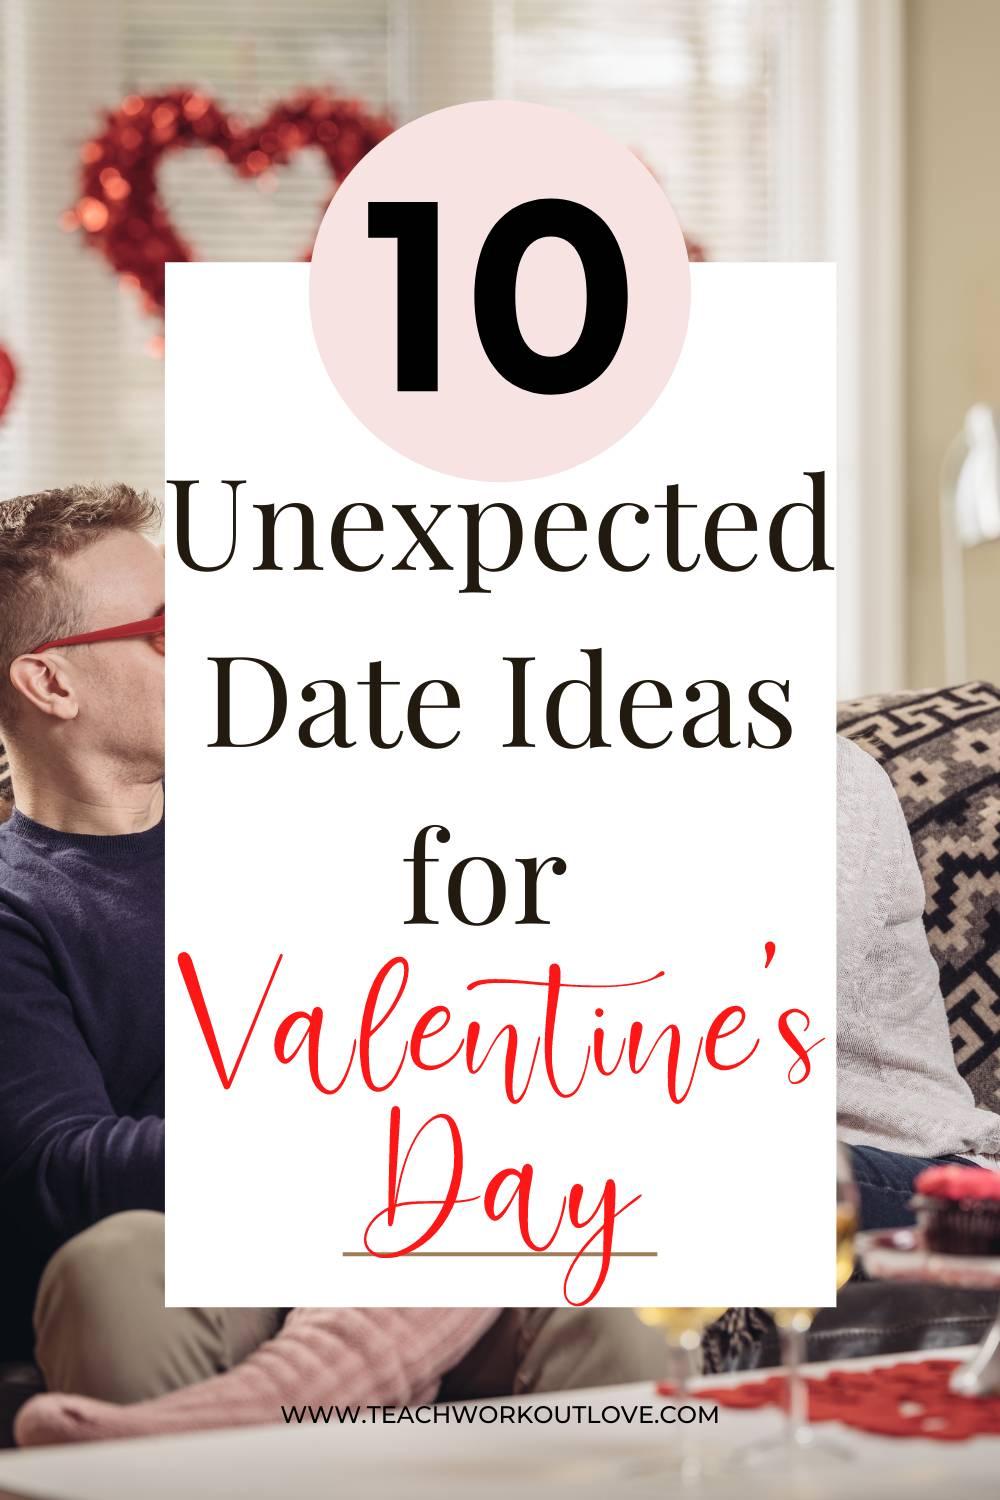 Do you need some date ideas for Valentine's Day? Do you want to impress your better half and make them feel special? Read on!